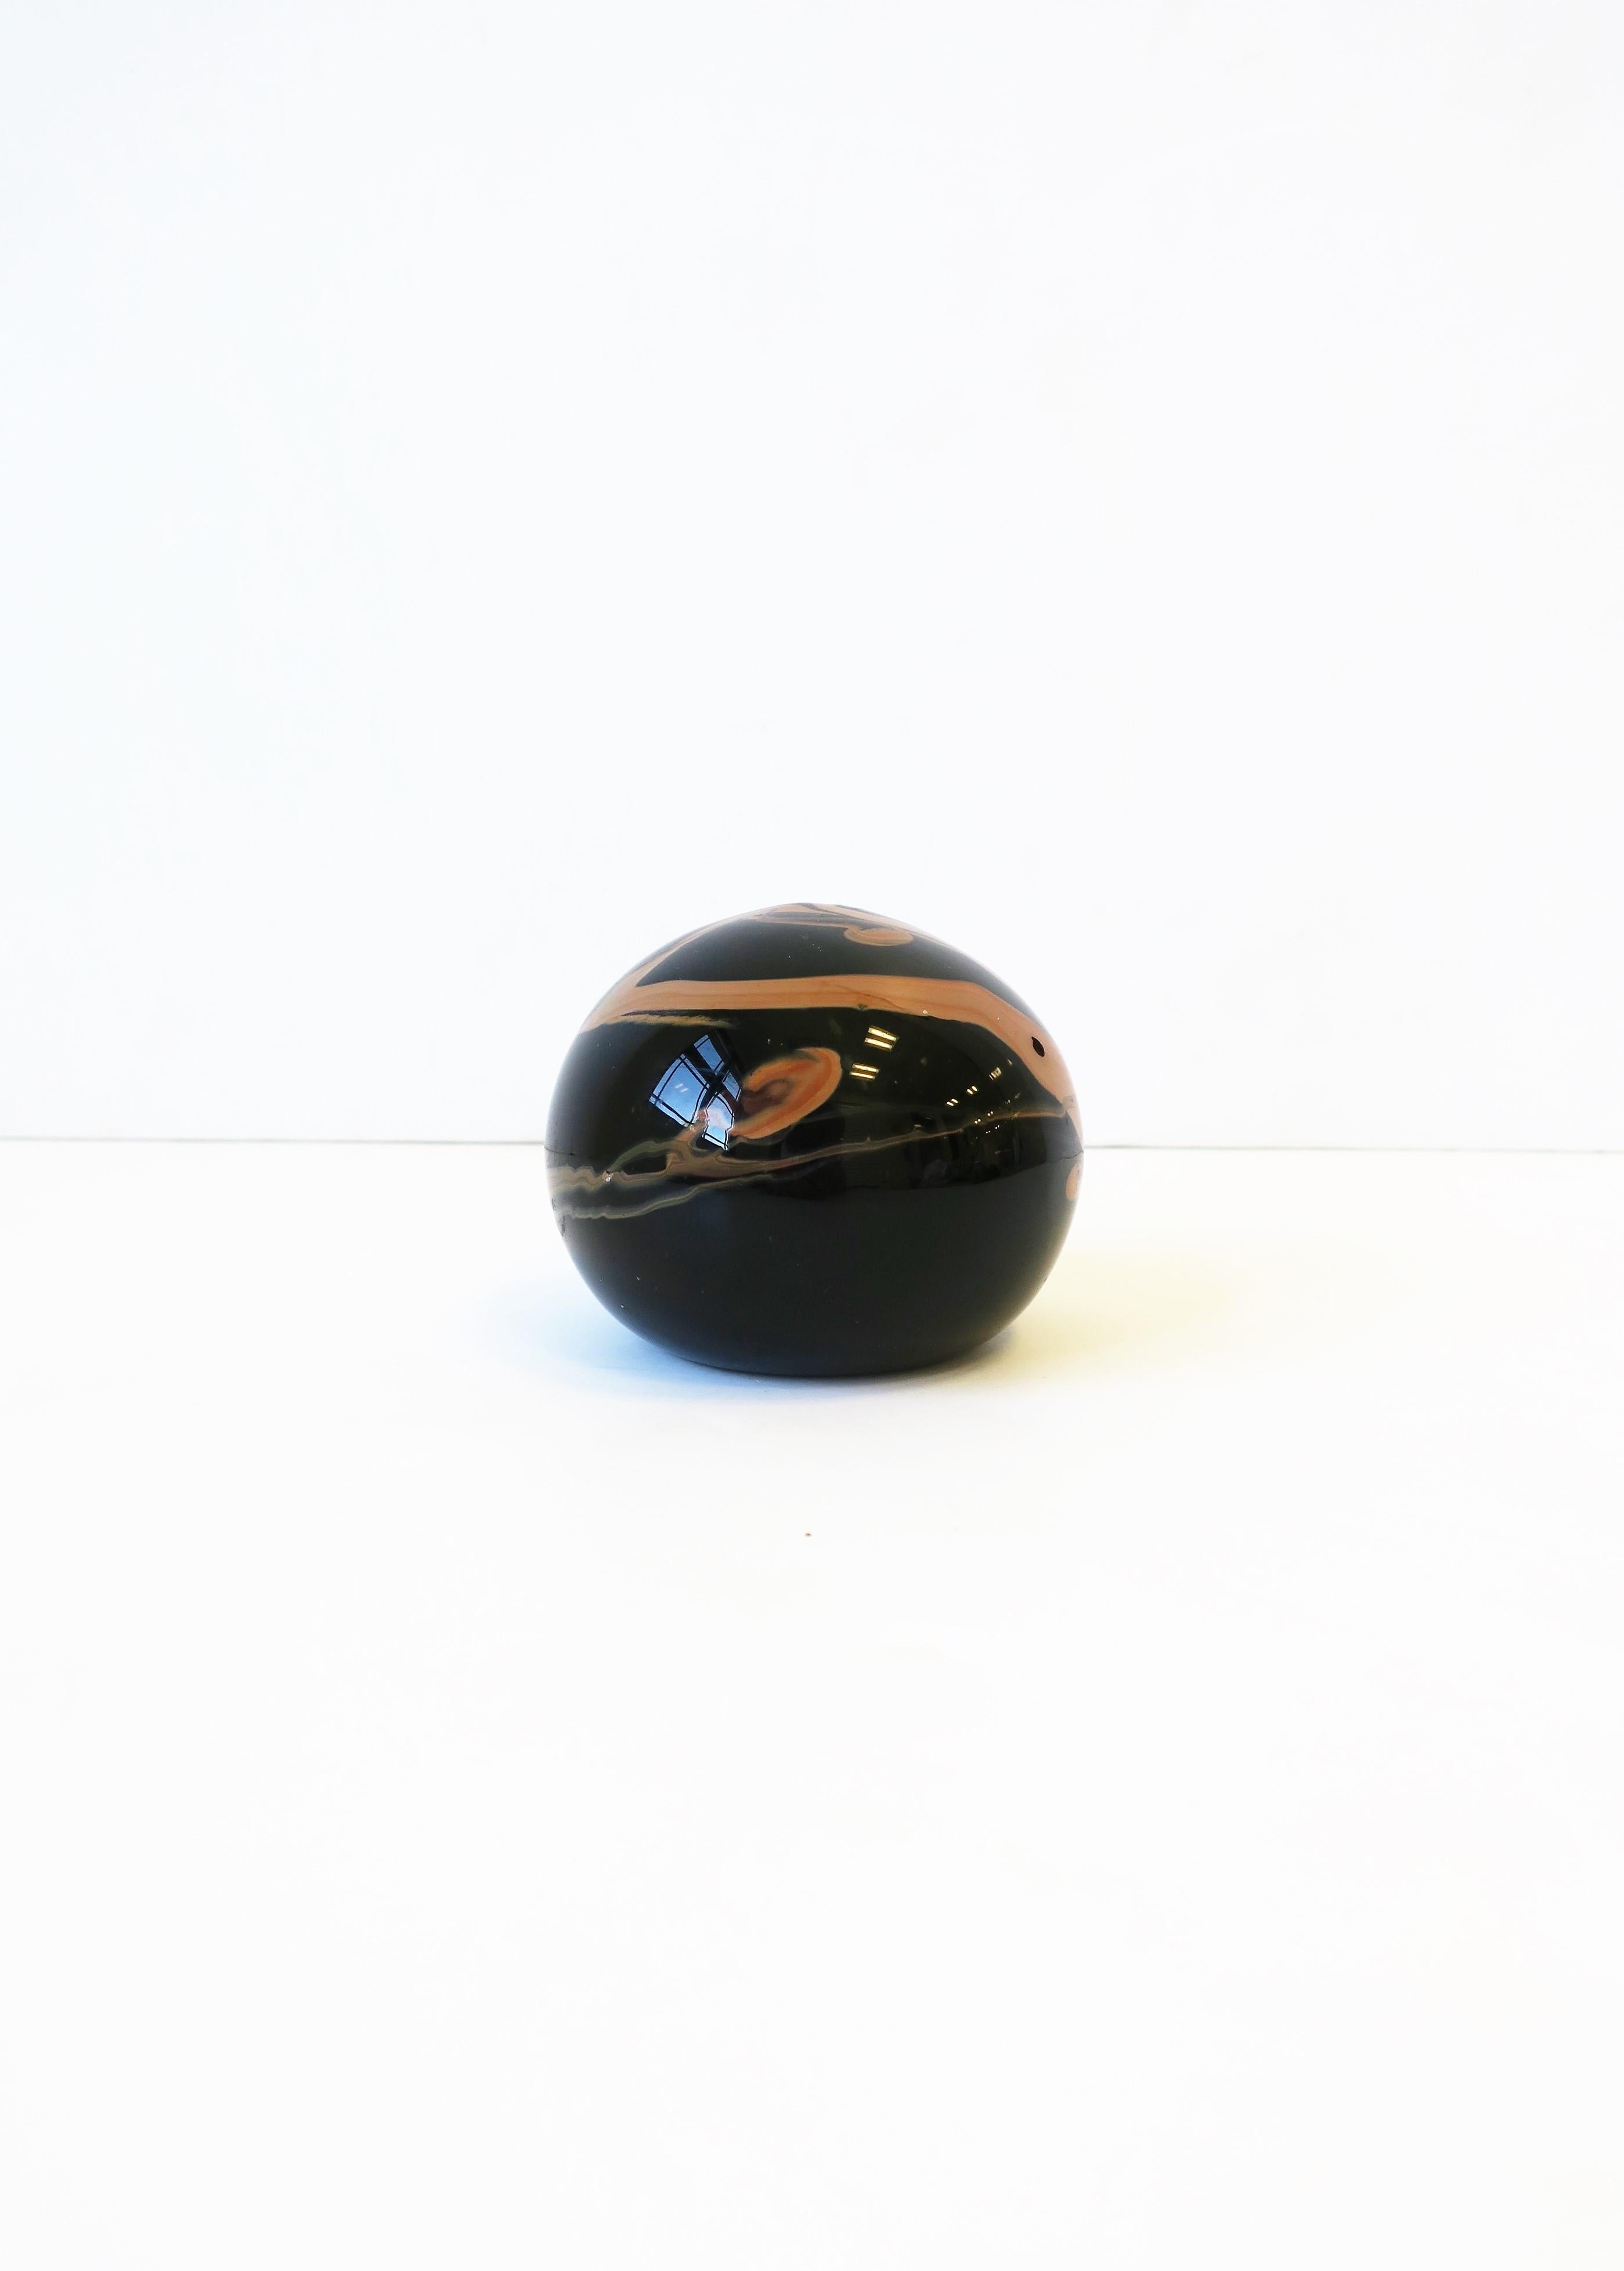 Modern Black Art Glass Paperweight or Decorative Object, circa 1970s For Sale 2